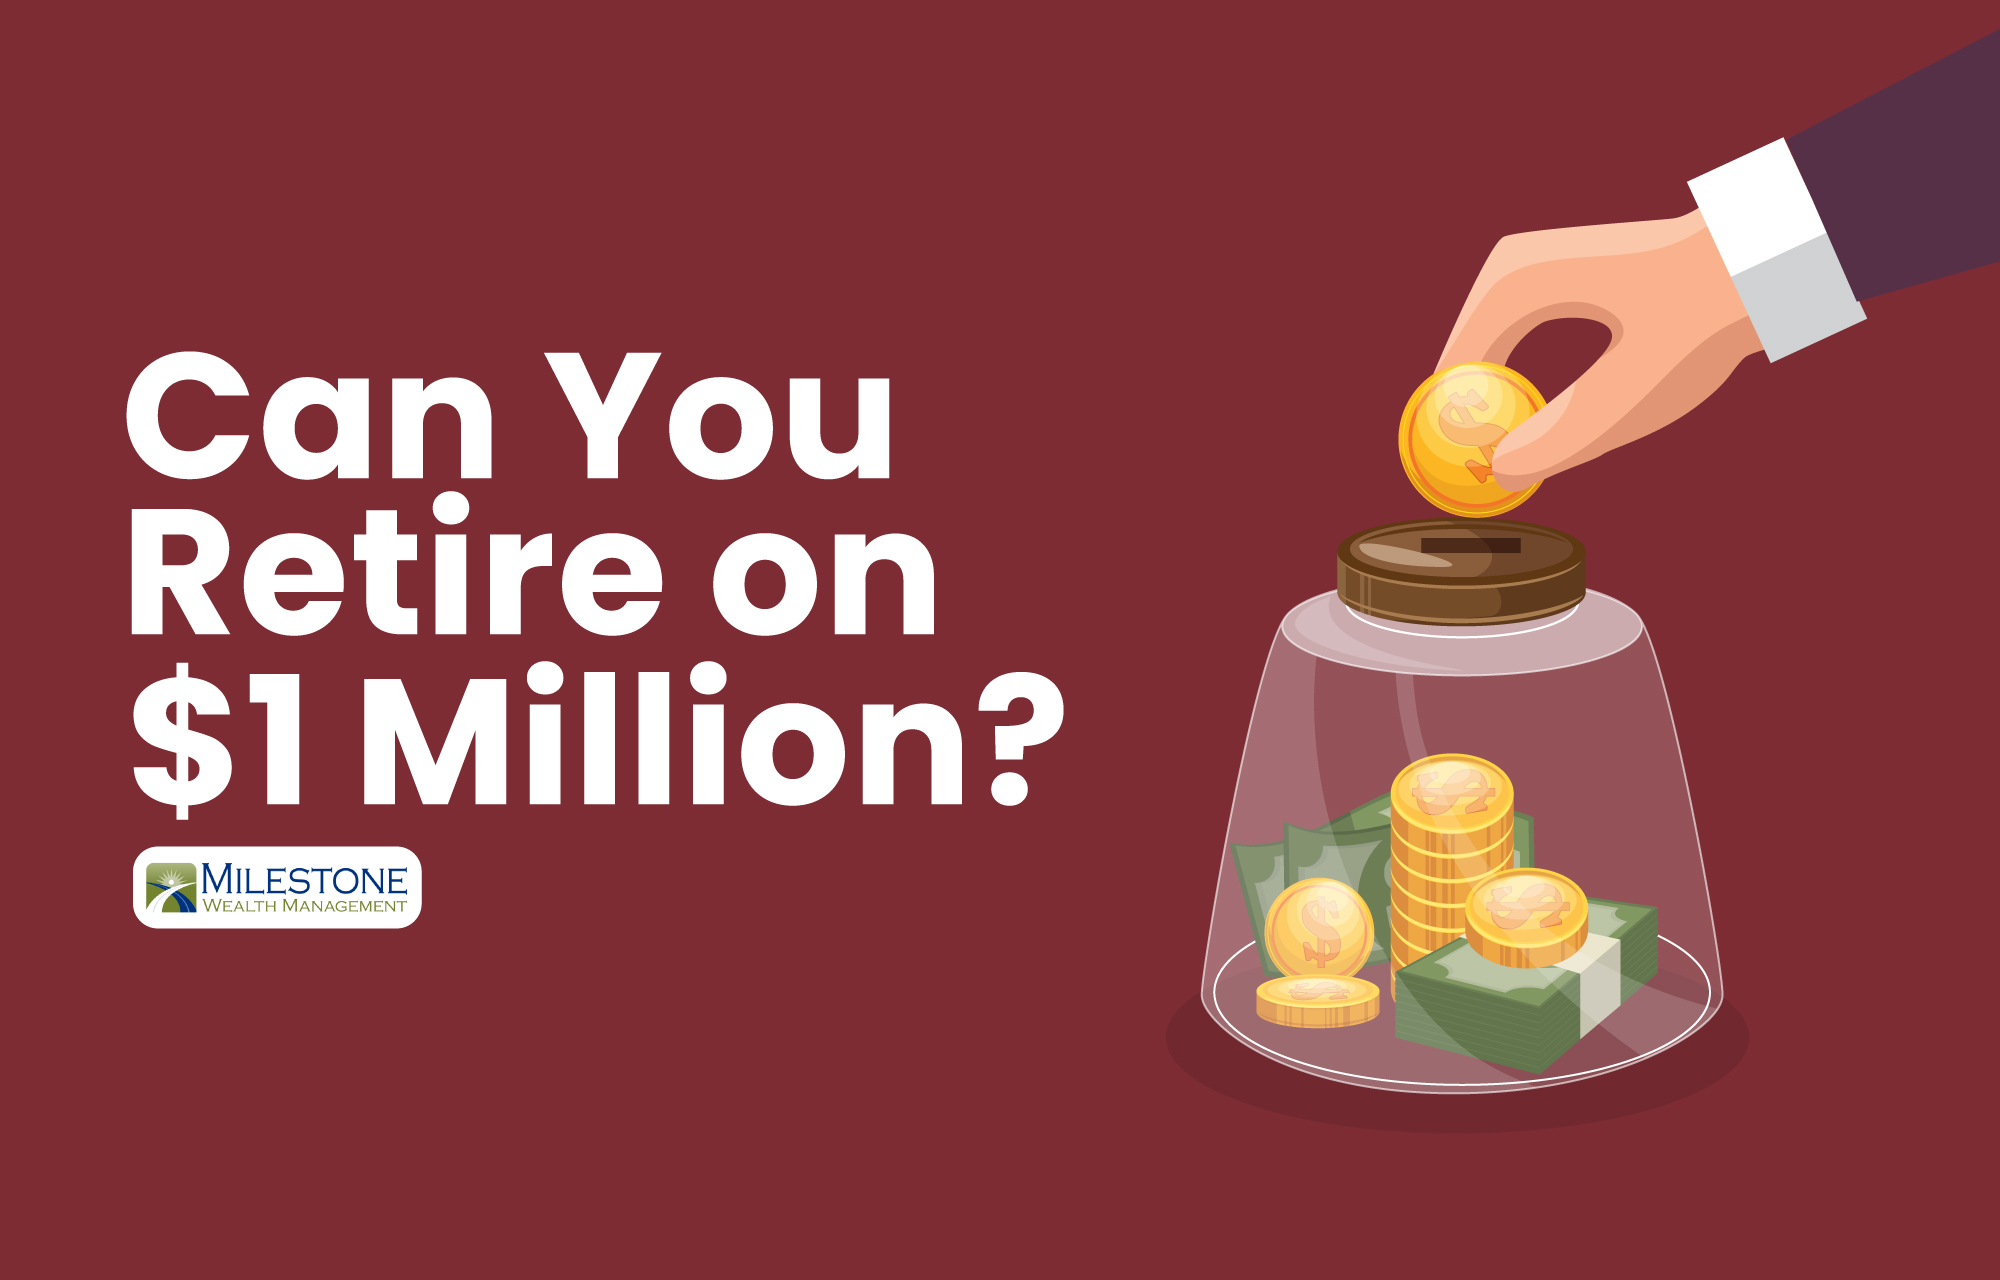 Can You Retire on $20 Million? - Milestone Wealth Management